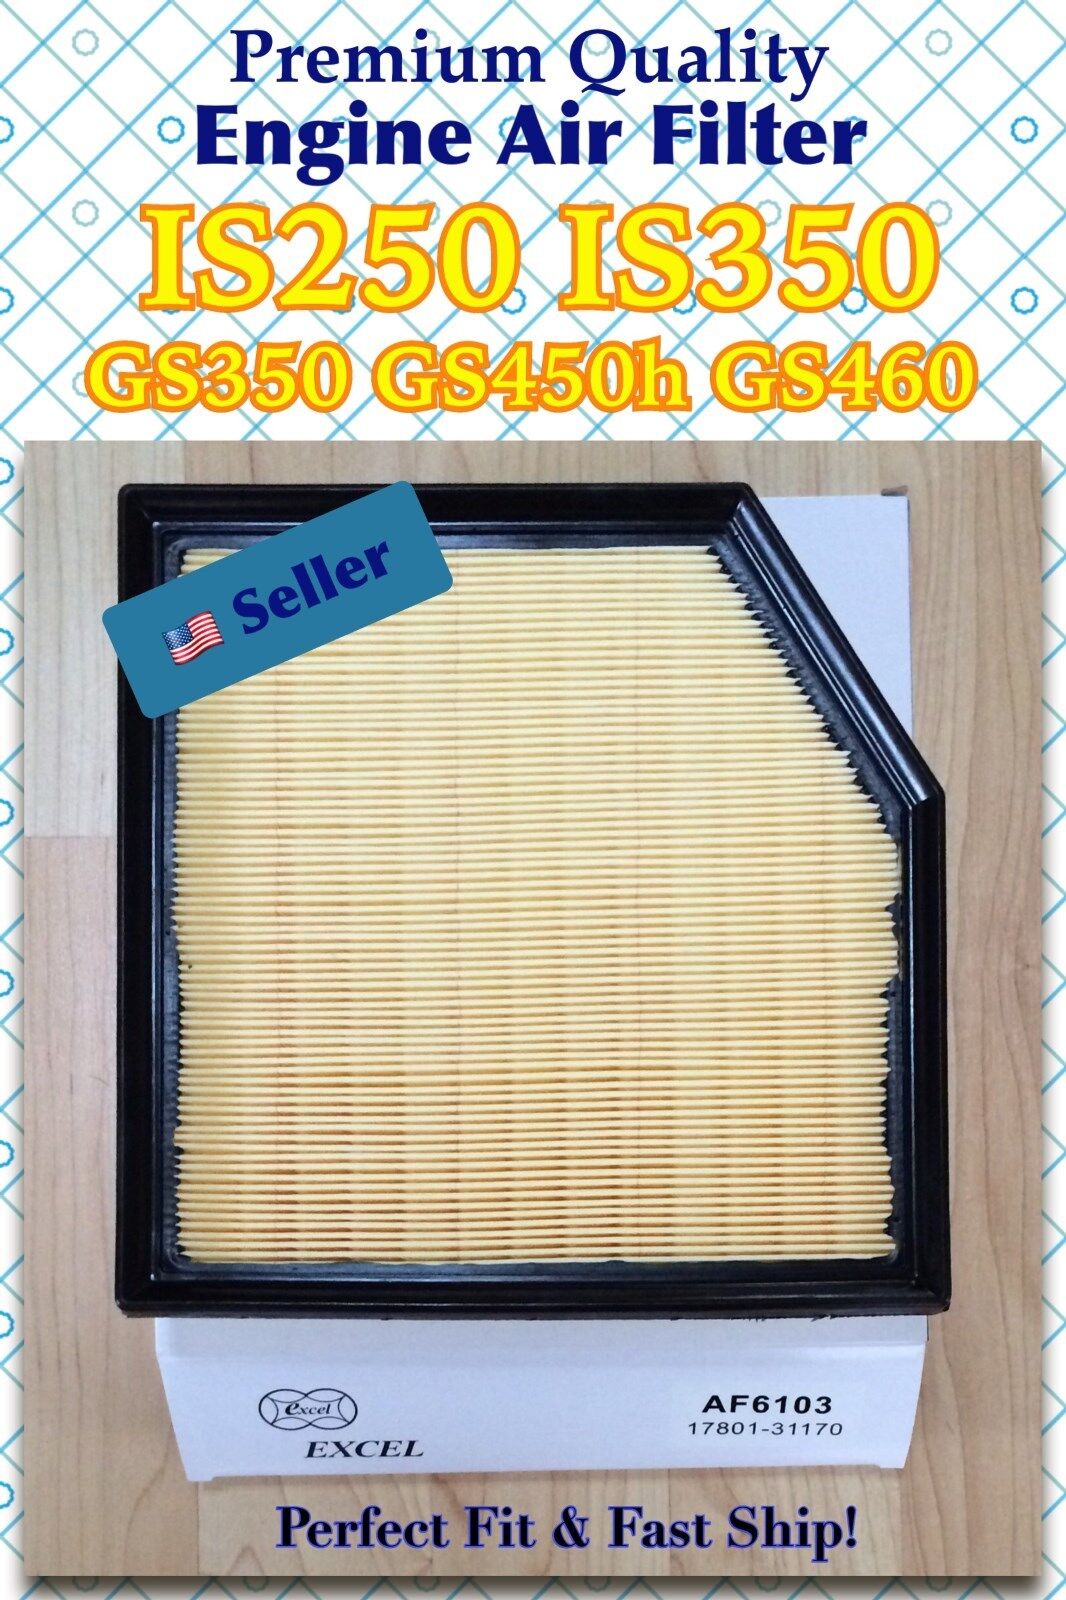 GS350 GS450h 13-20, GS460 08-11, IS250 IS350 14-15, RC350 Engine Air Filter 6103